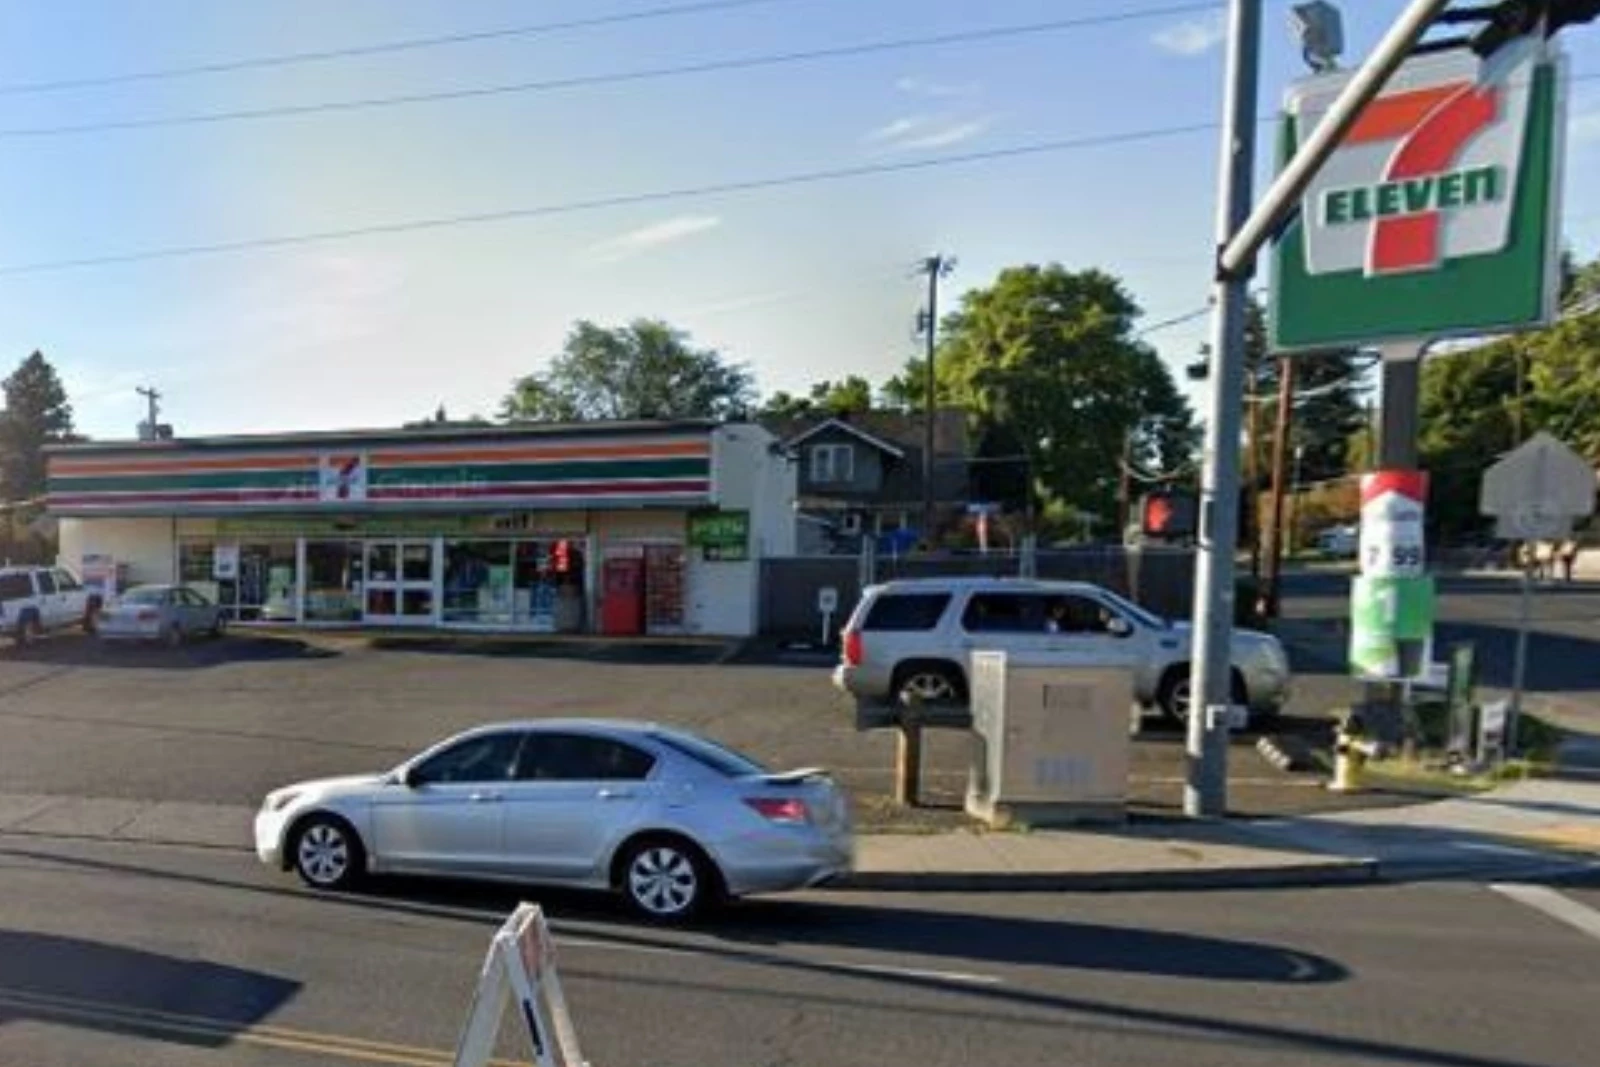 The Old 7-Eleven on Summitview 